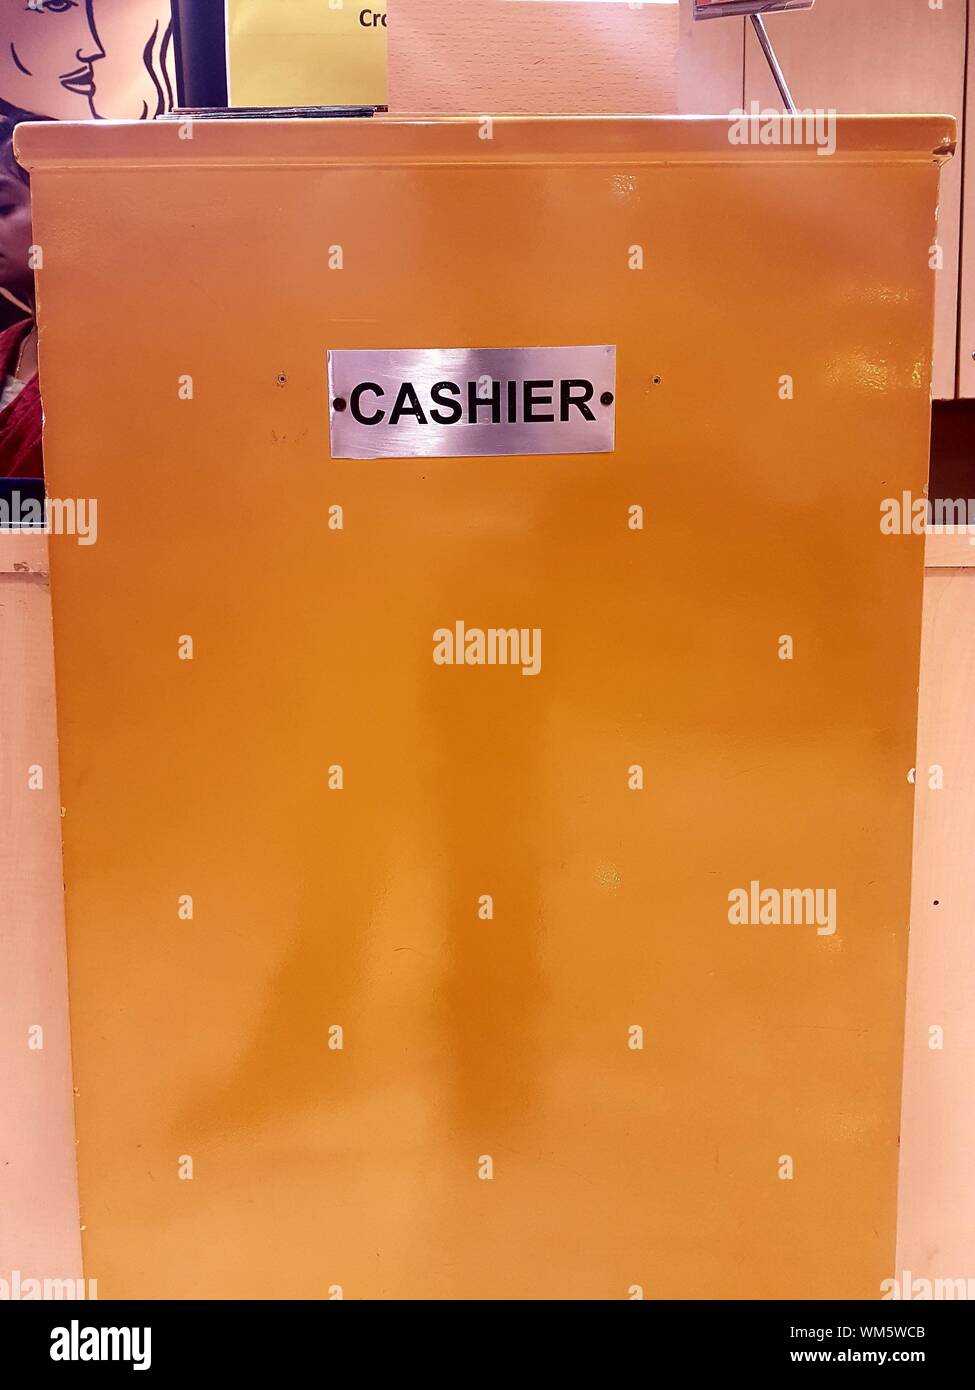 Cashier Sign On Metal Container Stock Photo